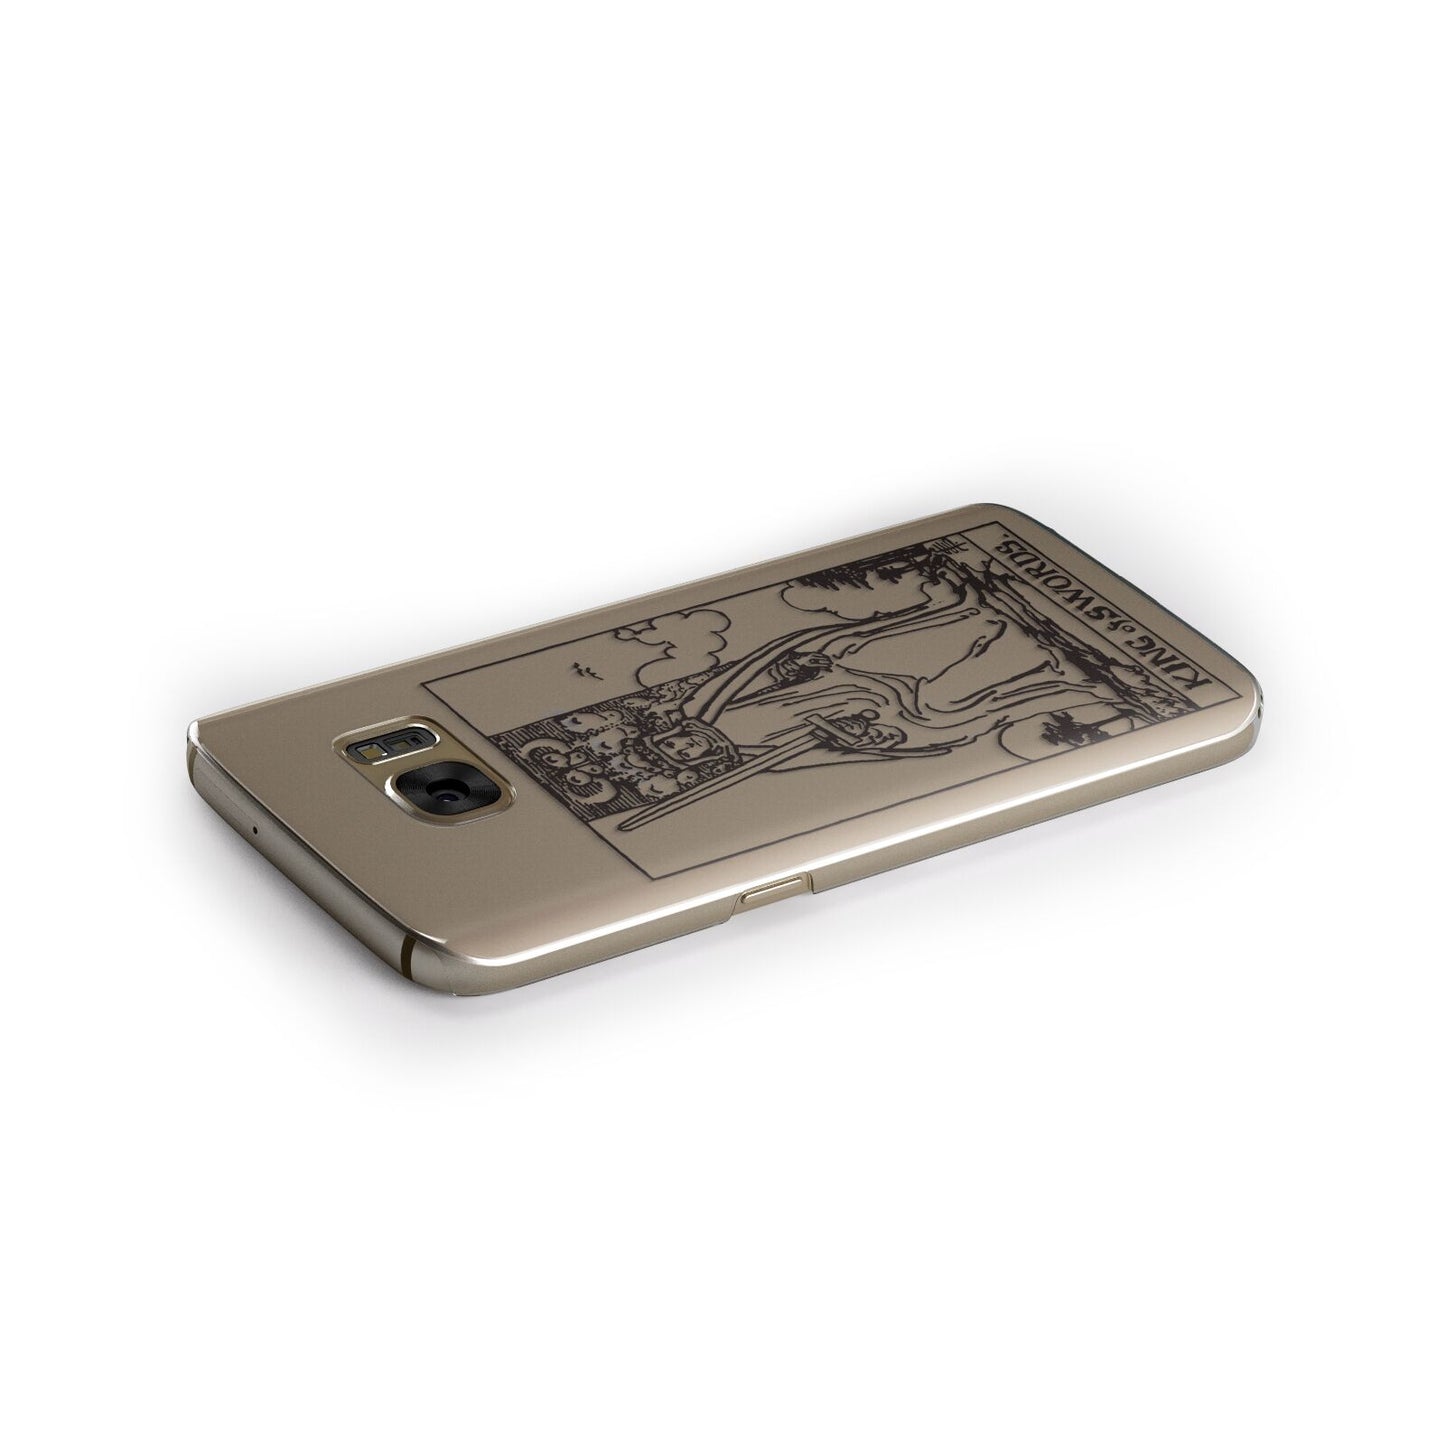 King of Swords Monochrome Samsung Galaxy Case Side Close Up